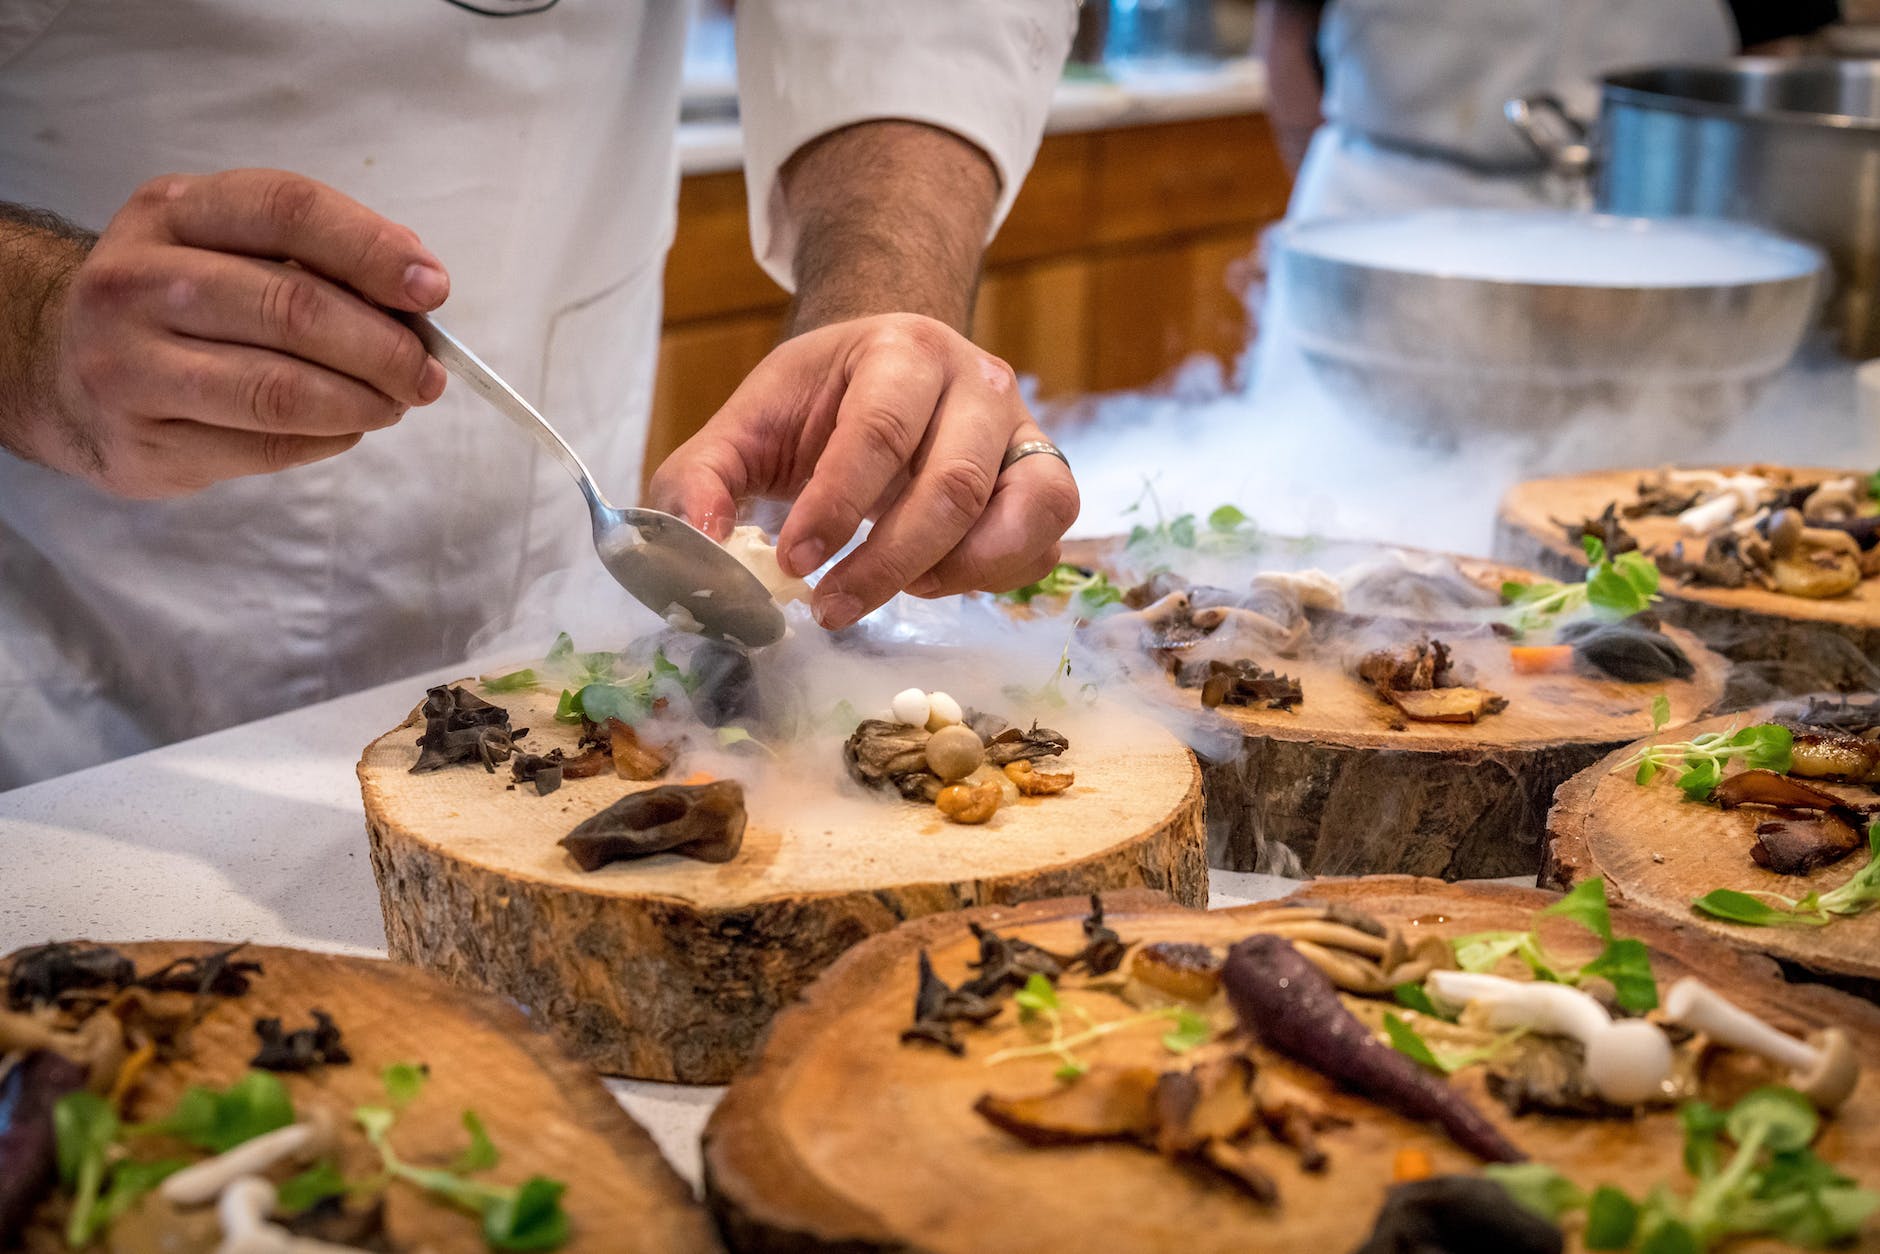 Starting a food business restaurant can be a challenging but rewarding experience. Here are some steps to consider: